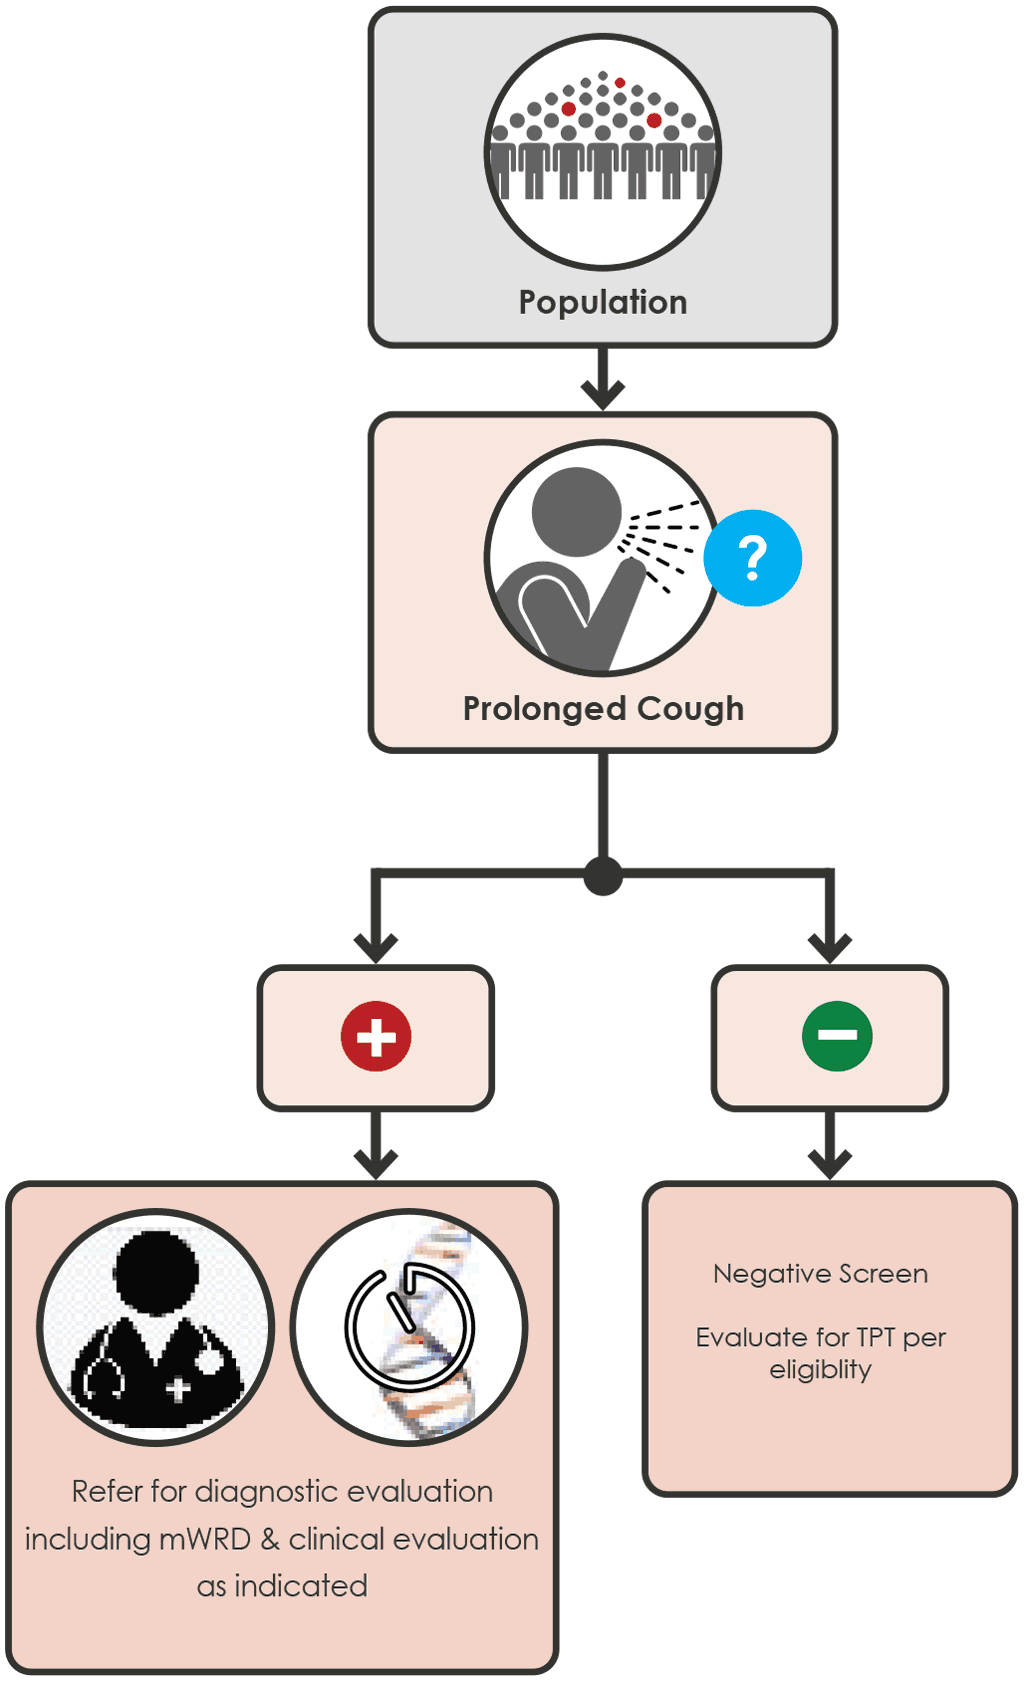 Screening with cough